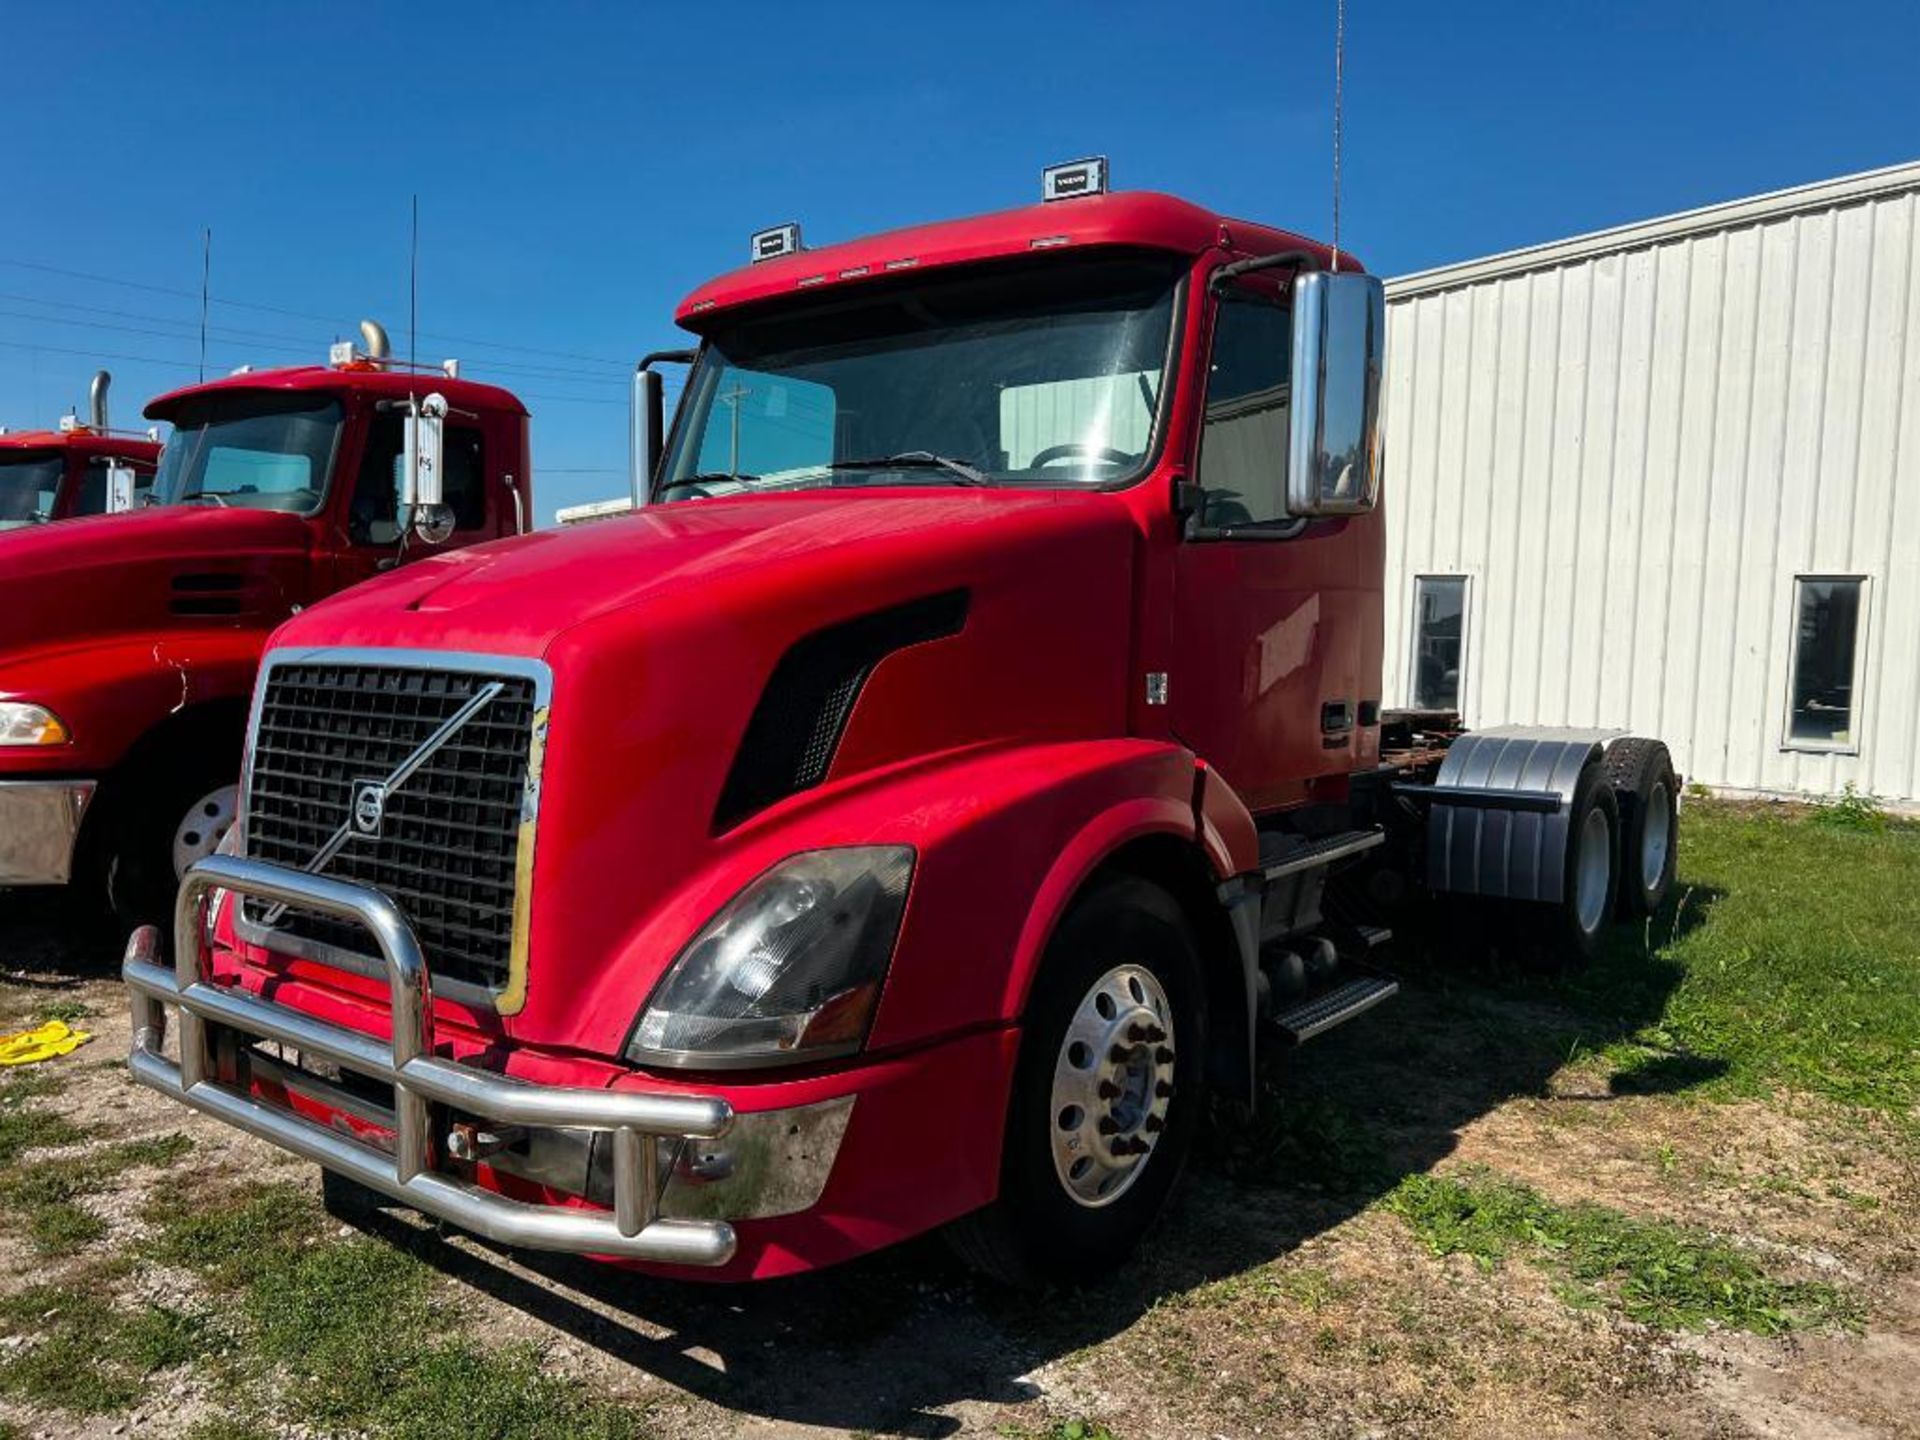 2009 Volvo D13 Tractor/Truck, miles showing 95,814, Easton Fuller 10 Speed Transmission, 435 HP - Image 2 of 31